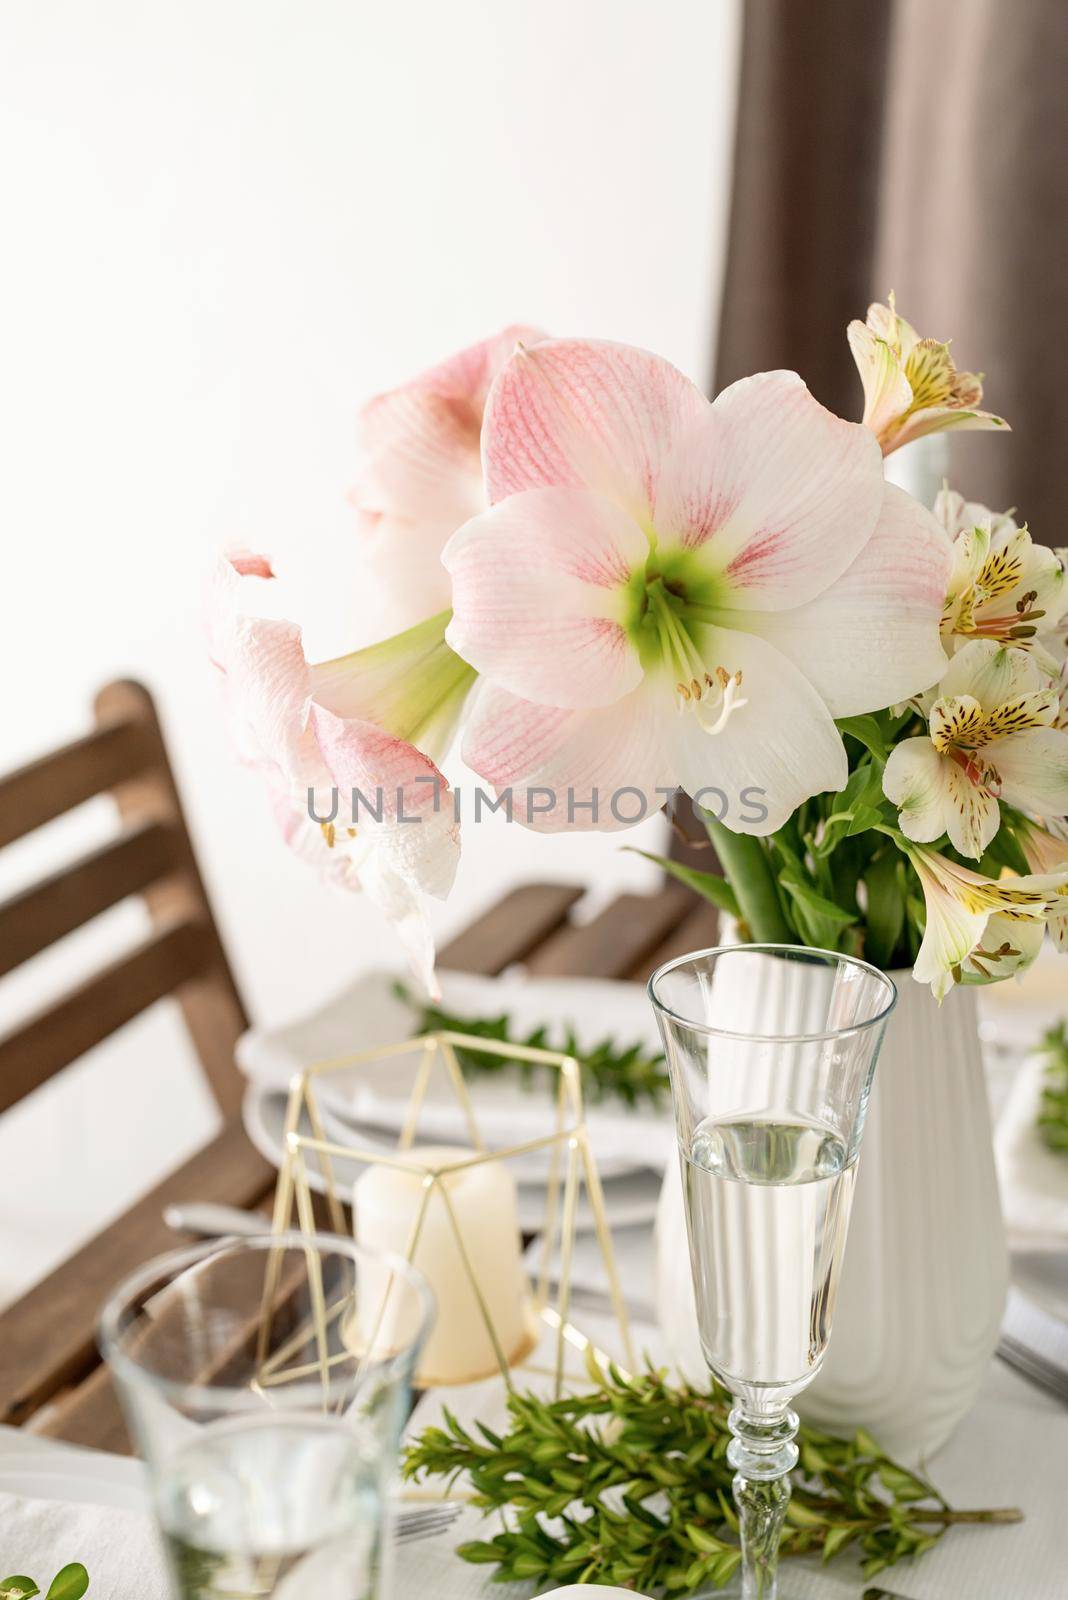 The wedding table setting and decor on wooden table in rustic style by Desperada